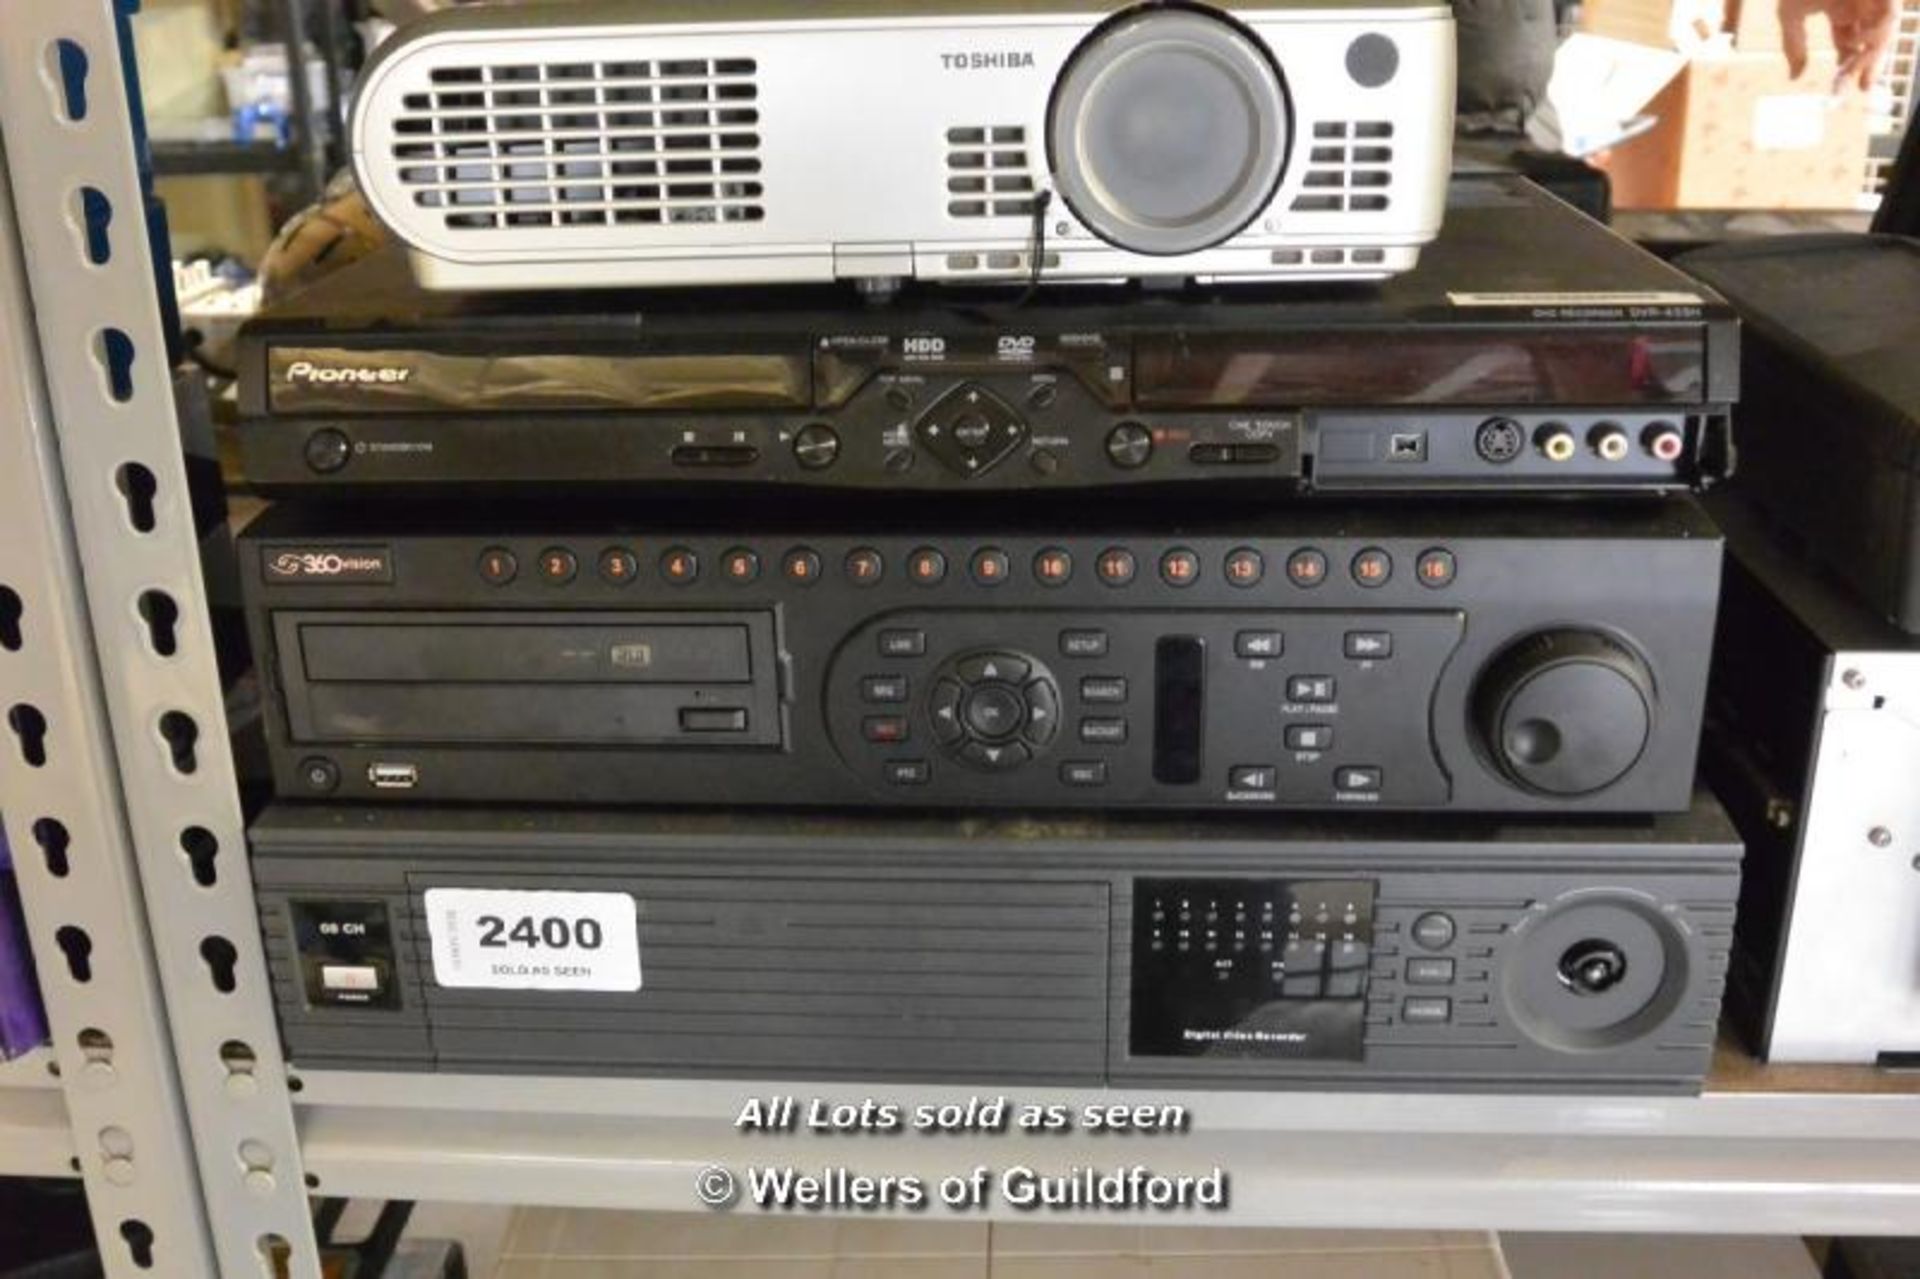 *STACK OF X4 MIXED ITEMS INC X2 DVR'S, HDD RECORDER AND TOSHIBA PROJECTOR